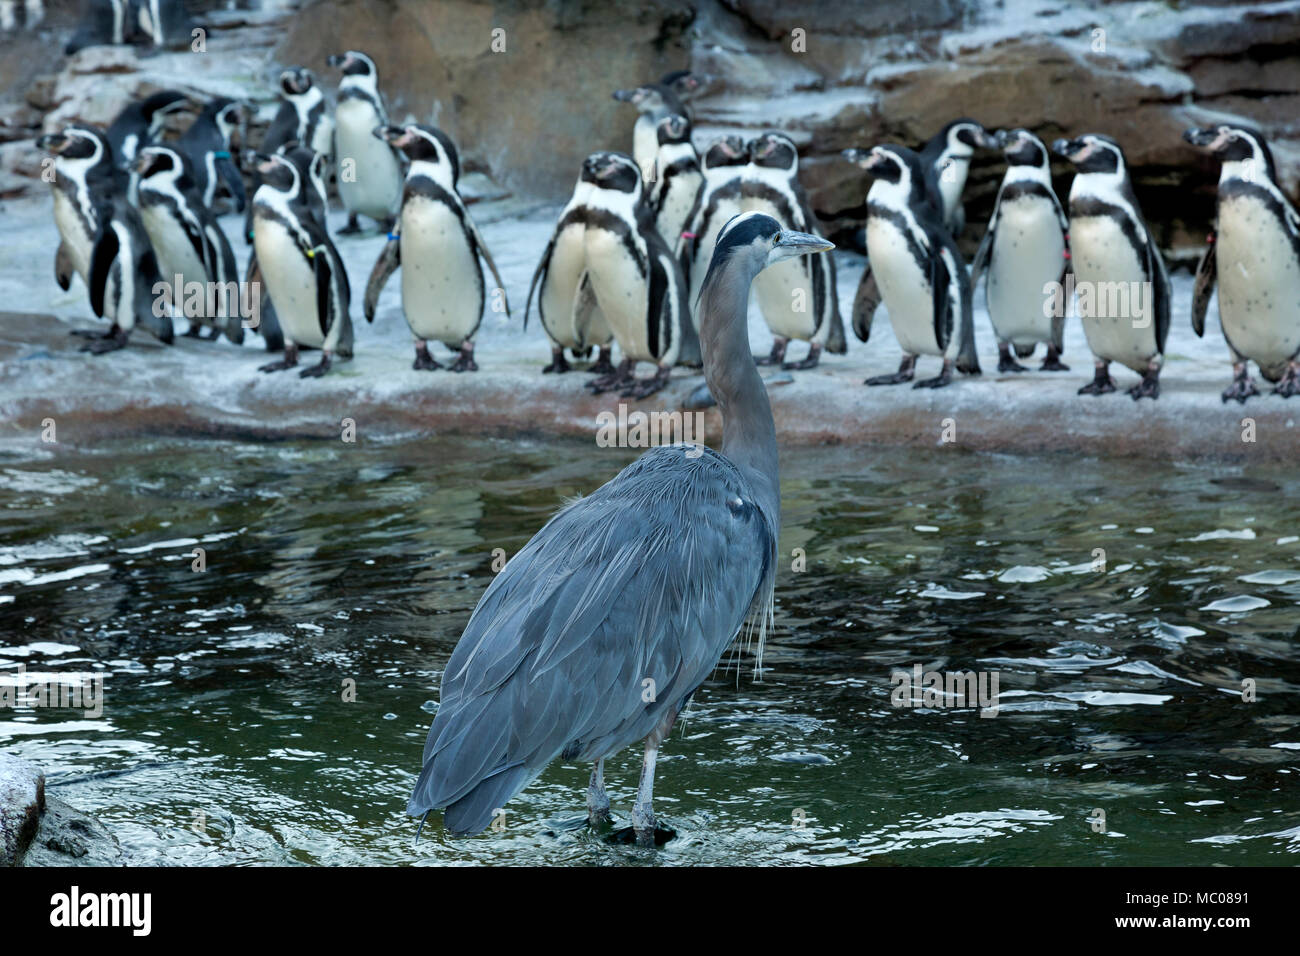 WA15120-00...WASHINGTON - A wild great blue heron waiting for feeding time with the Humboldt penguins at Seattle's Woodland Park Zoo. Stock Photo